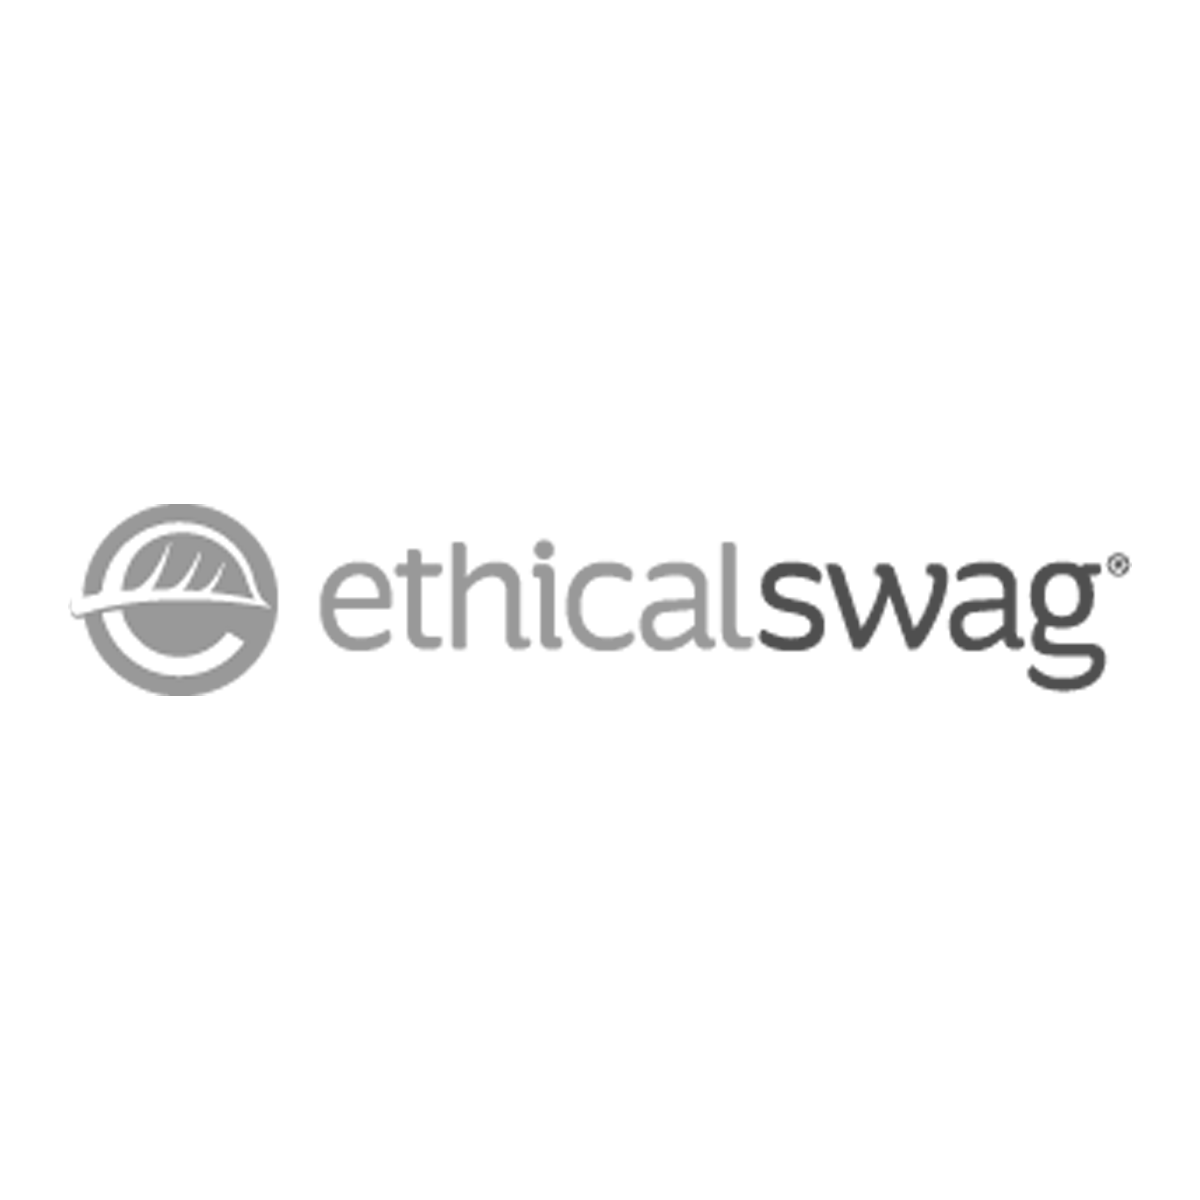 Ethical Swag (1)